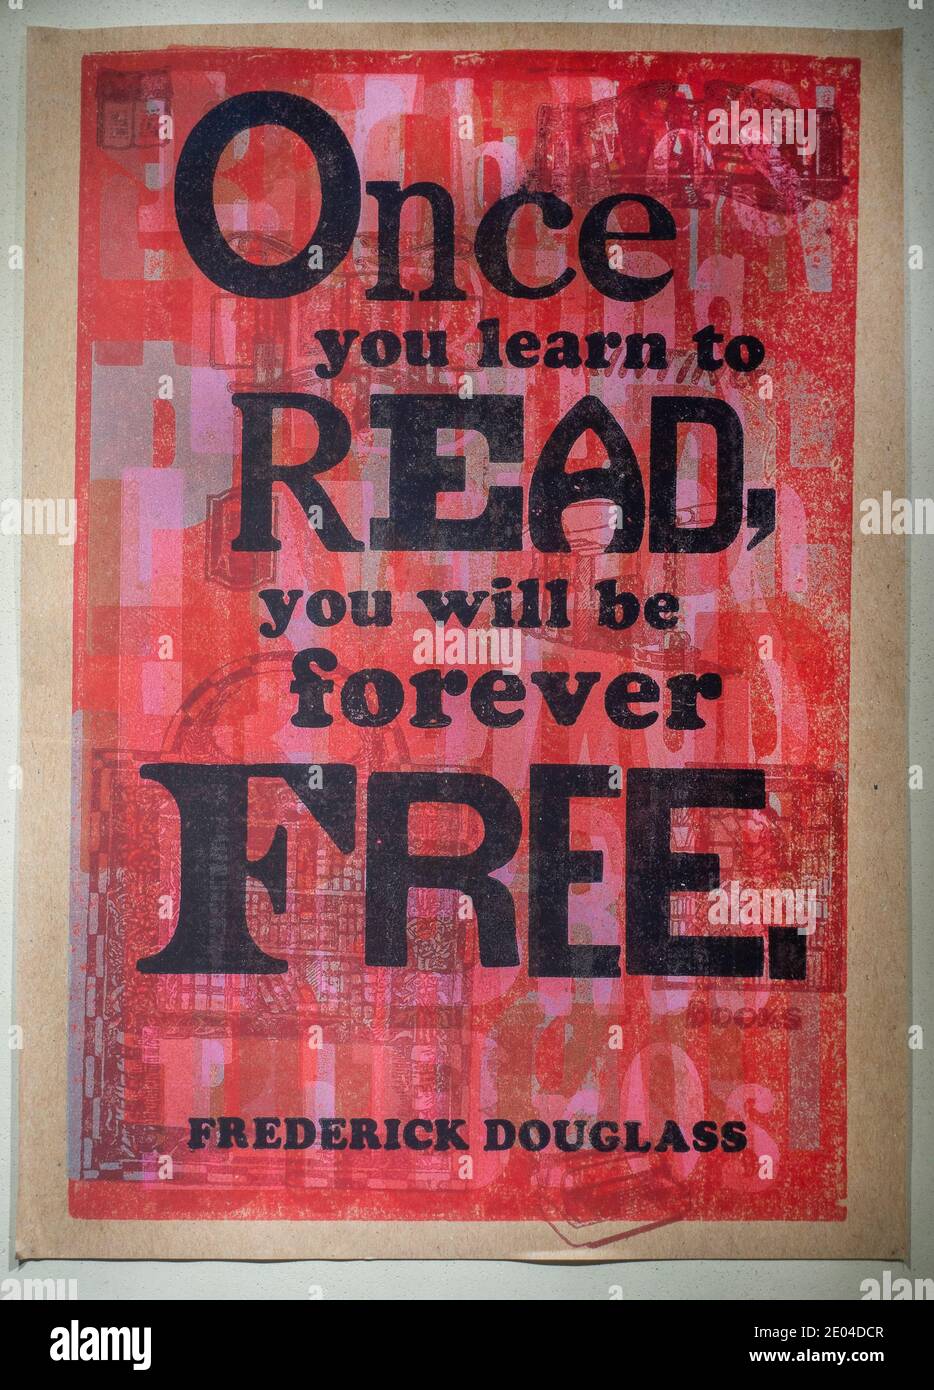 once you learn to read you will be forever free saying by Frederick Douglass artwork at Brooklyn Public Library NYC Stock Photo